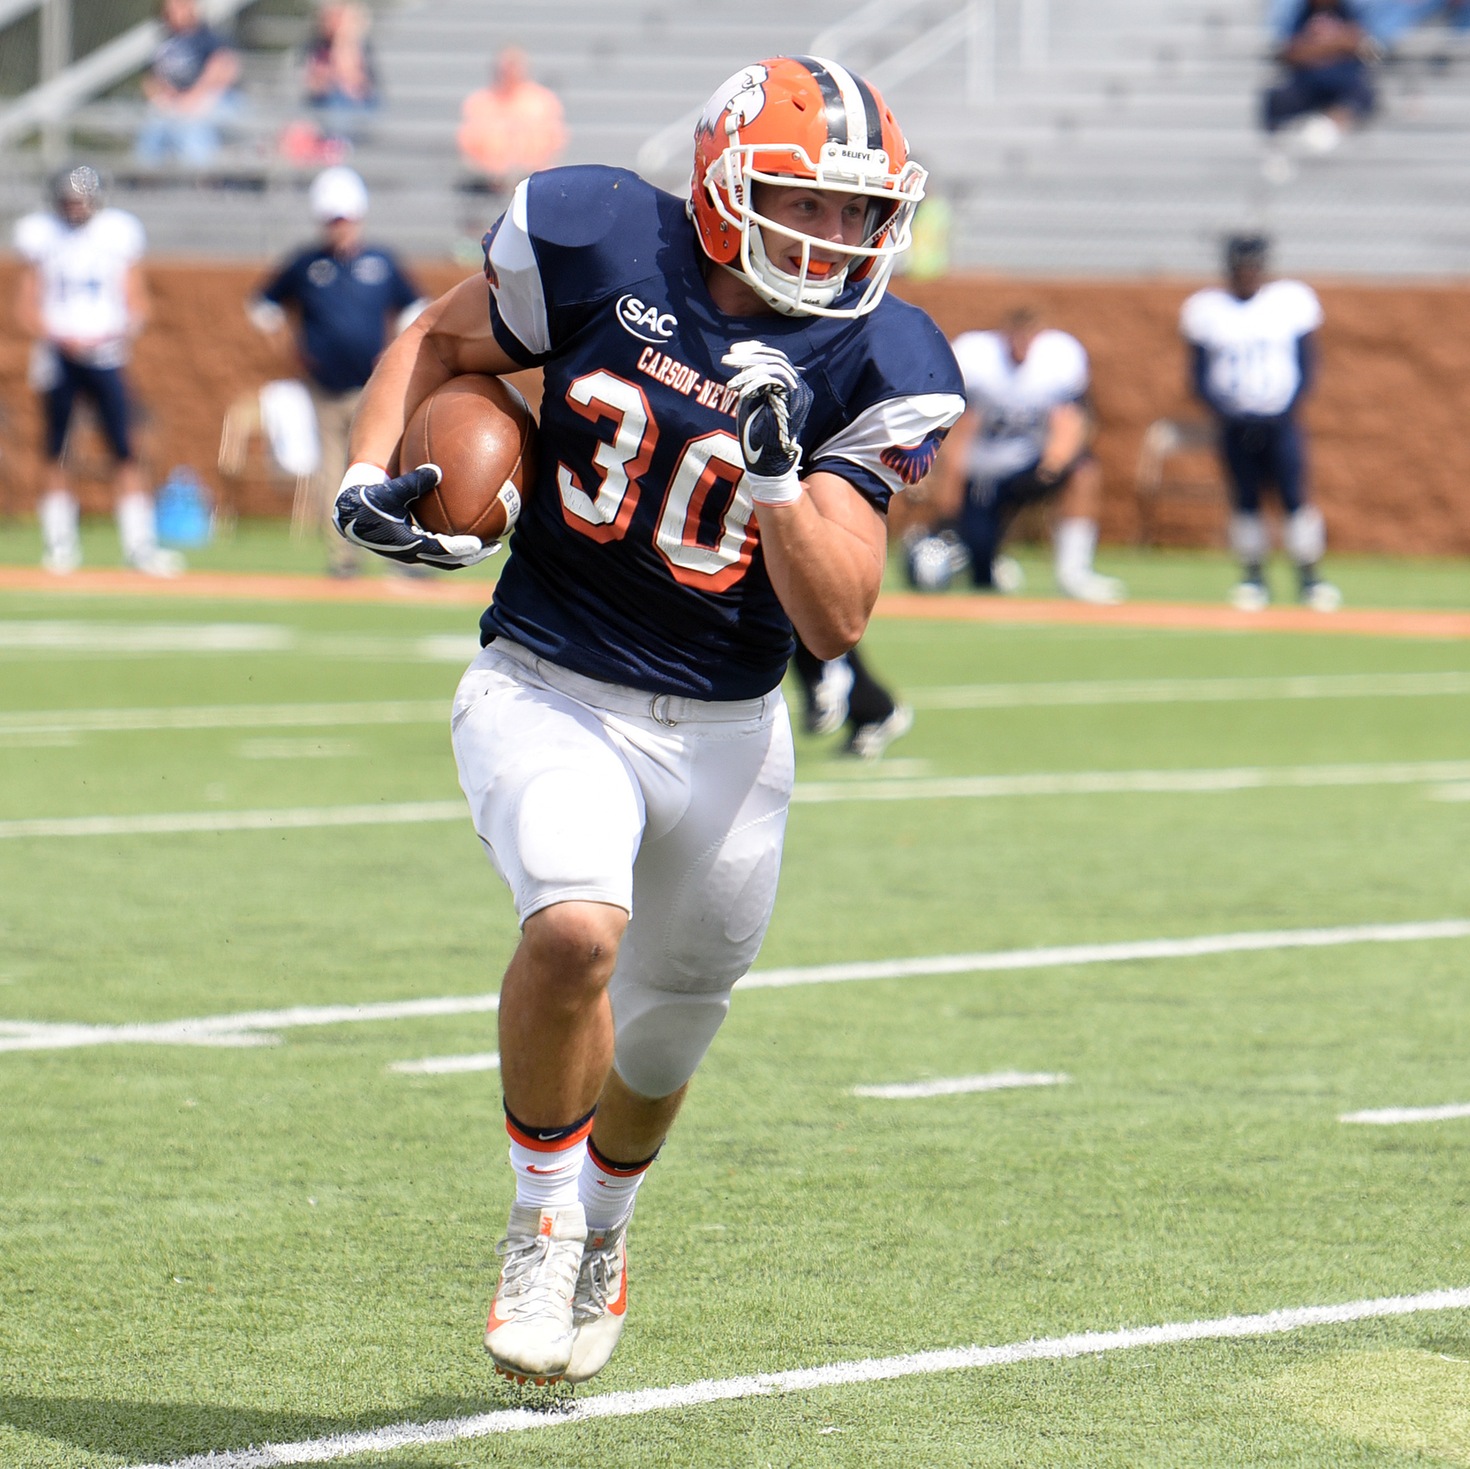 Determined Dillingham grinds his way up C-N's depth chart